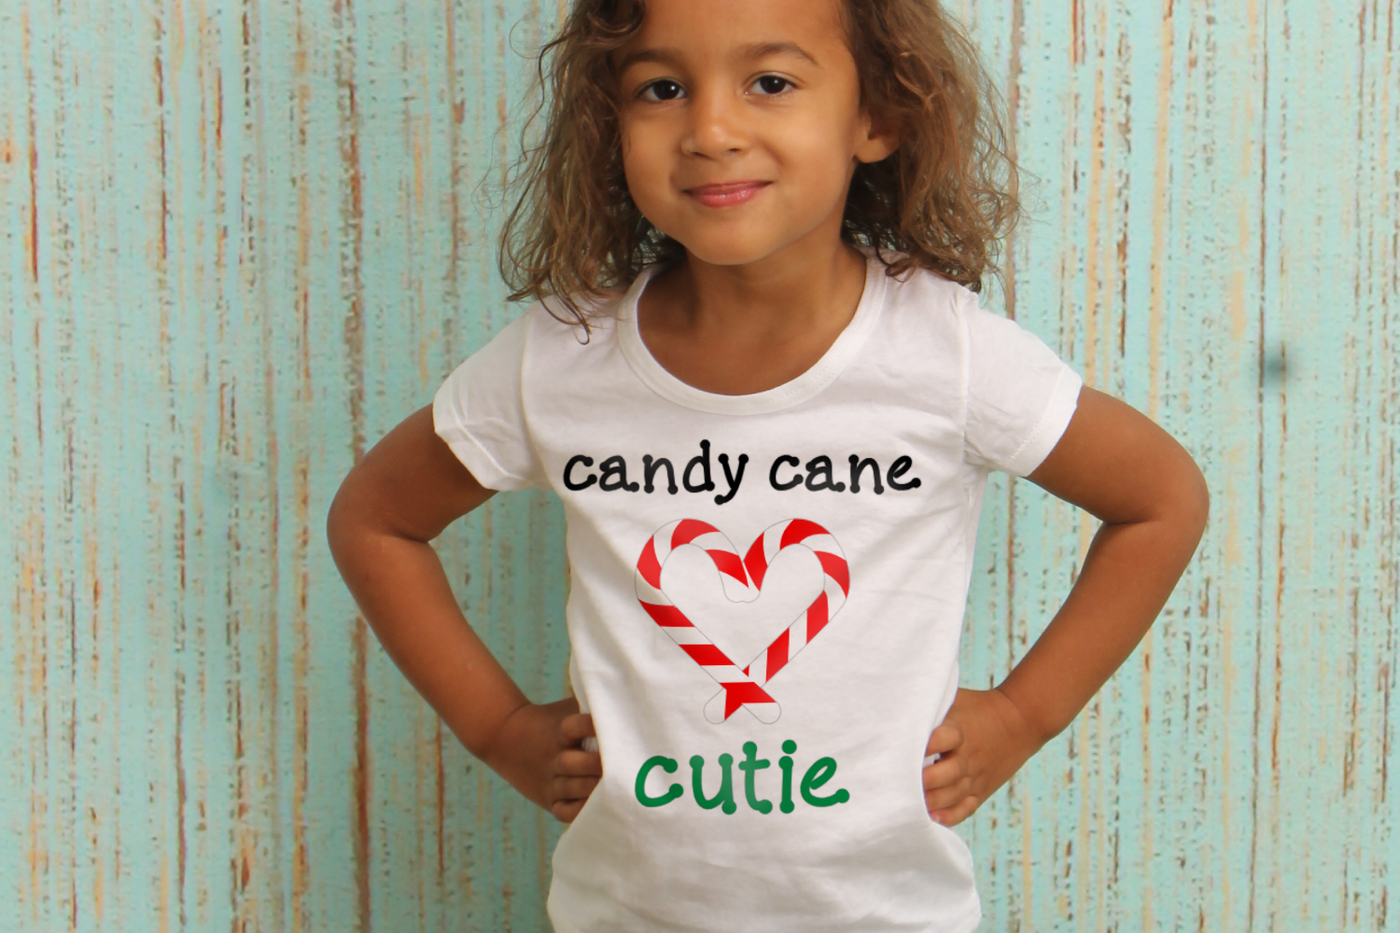 A black little girl smiles with her hands on her hips. Her shirt says "candy cane cutie" and there are 2 candy canes forming a heart shape.